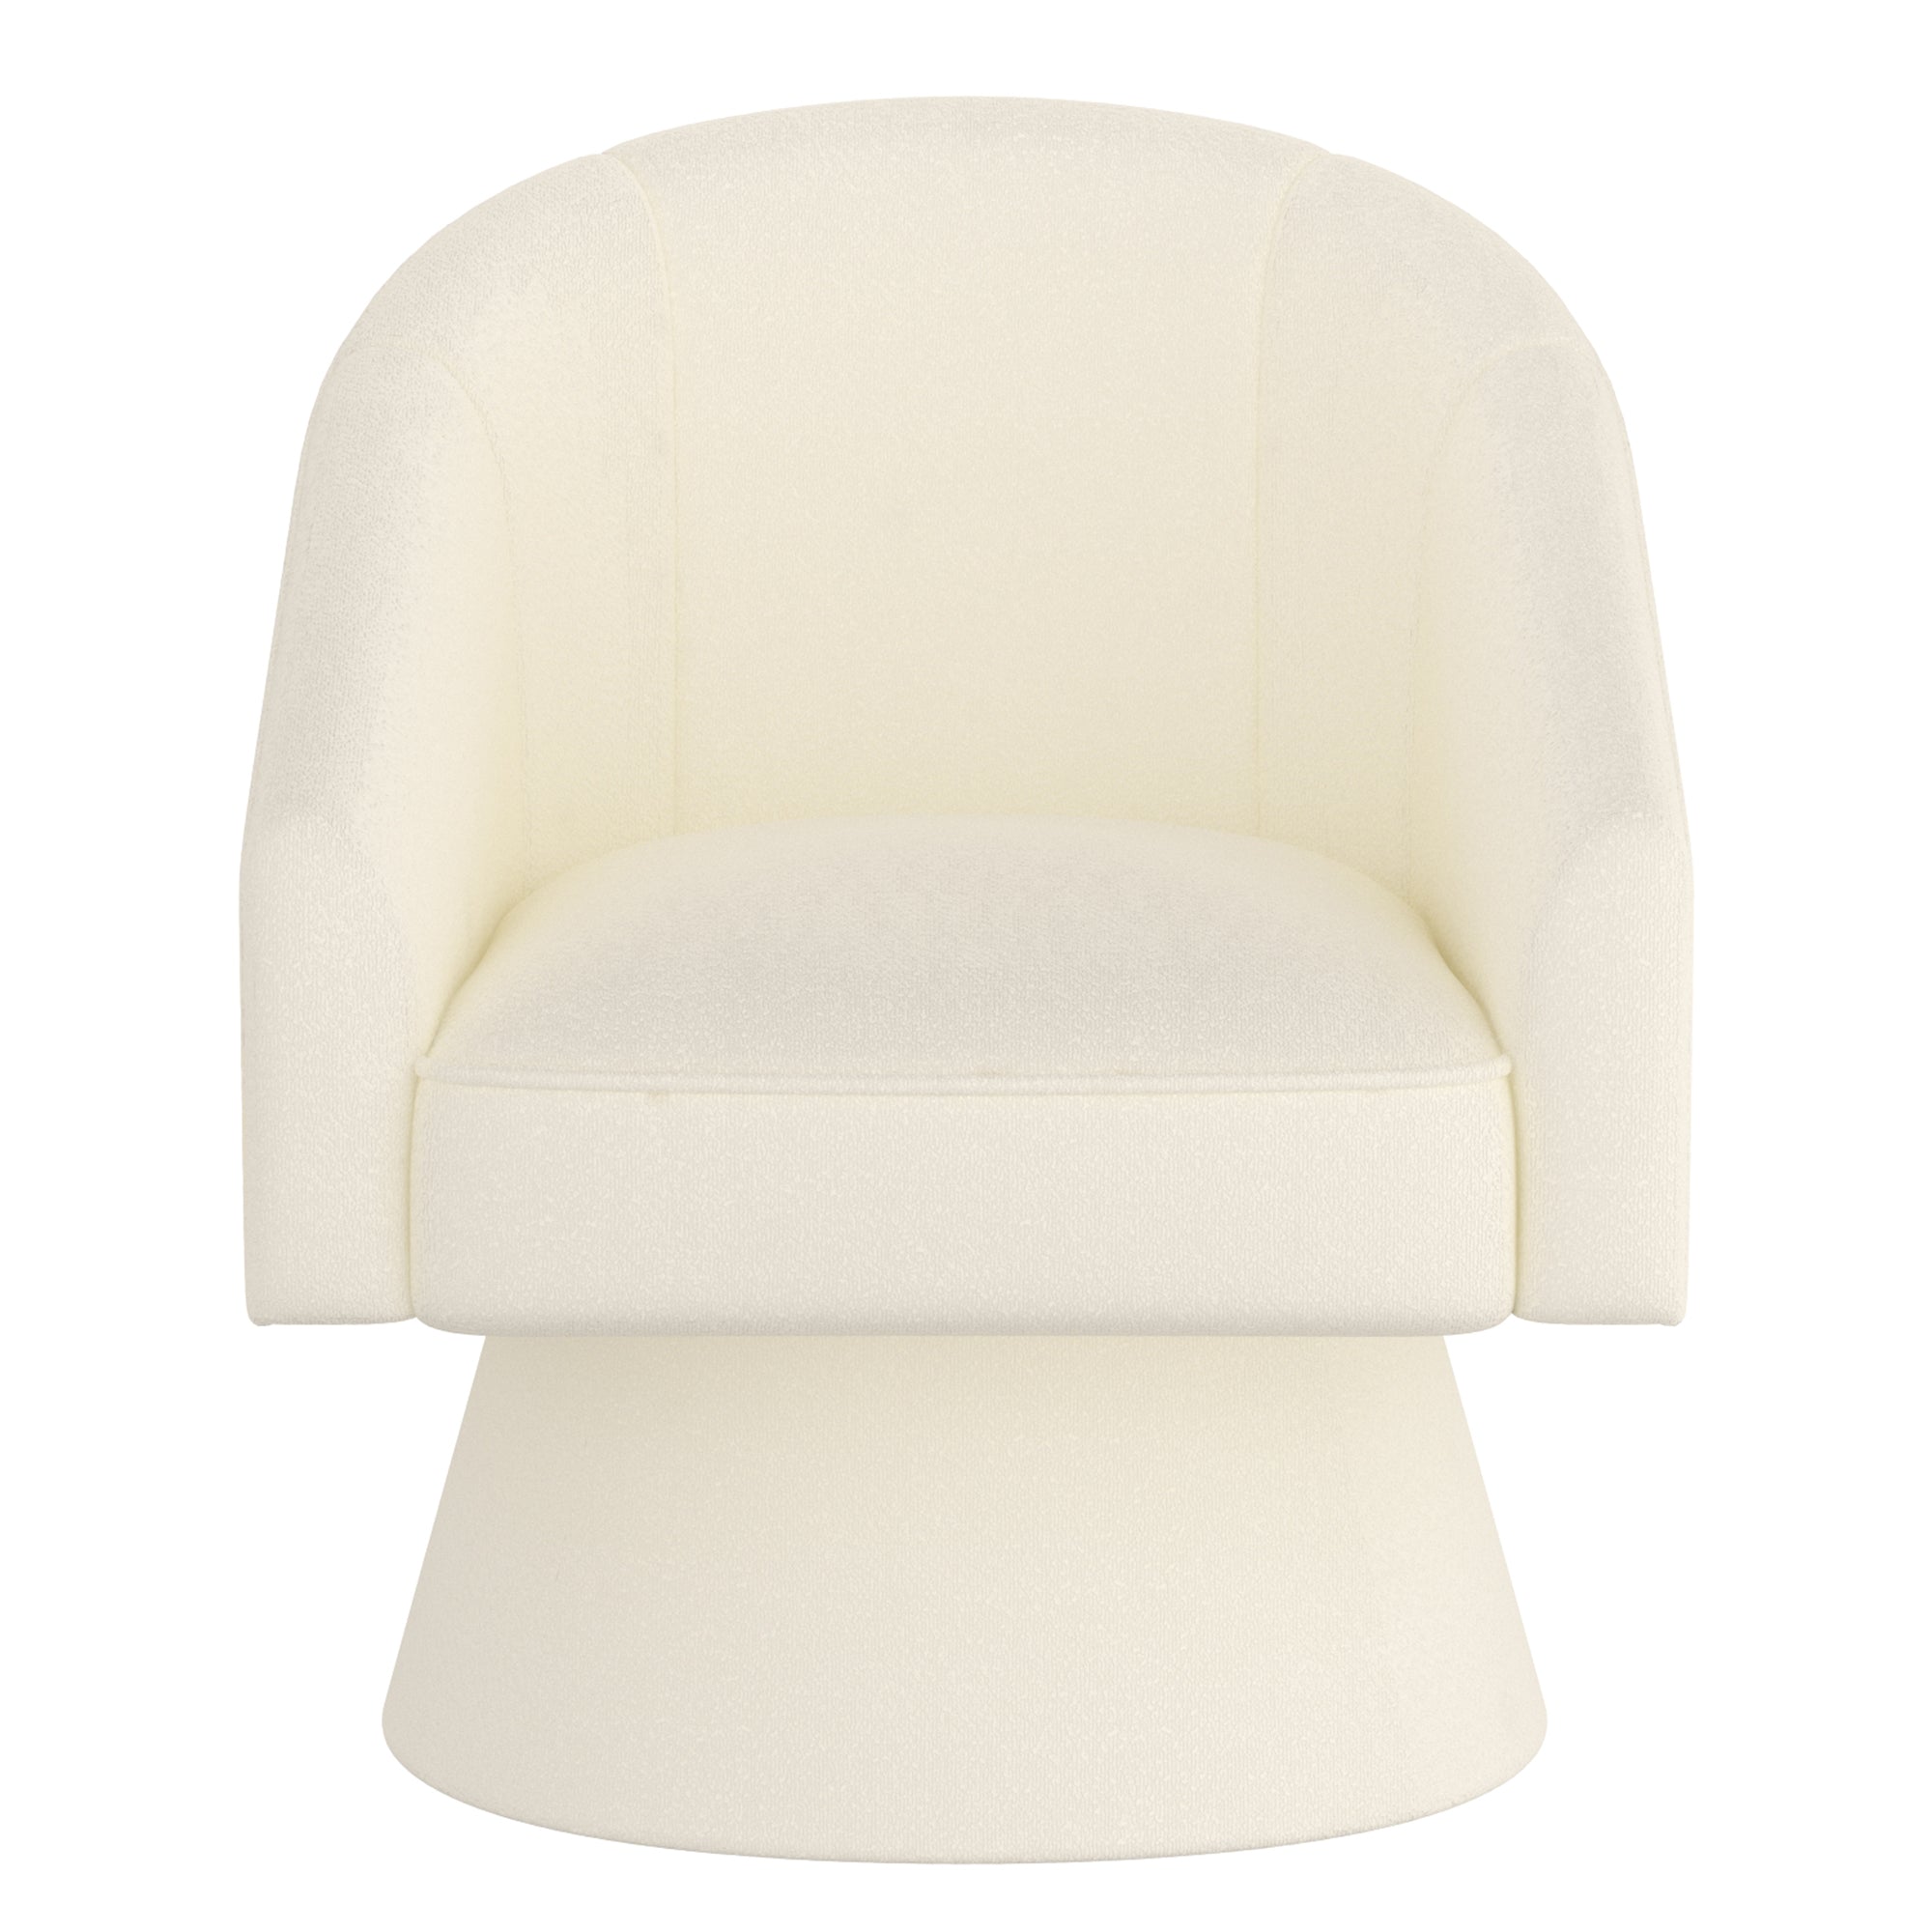 TILSY-ACCENT CHAIR-IVORY